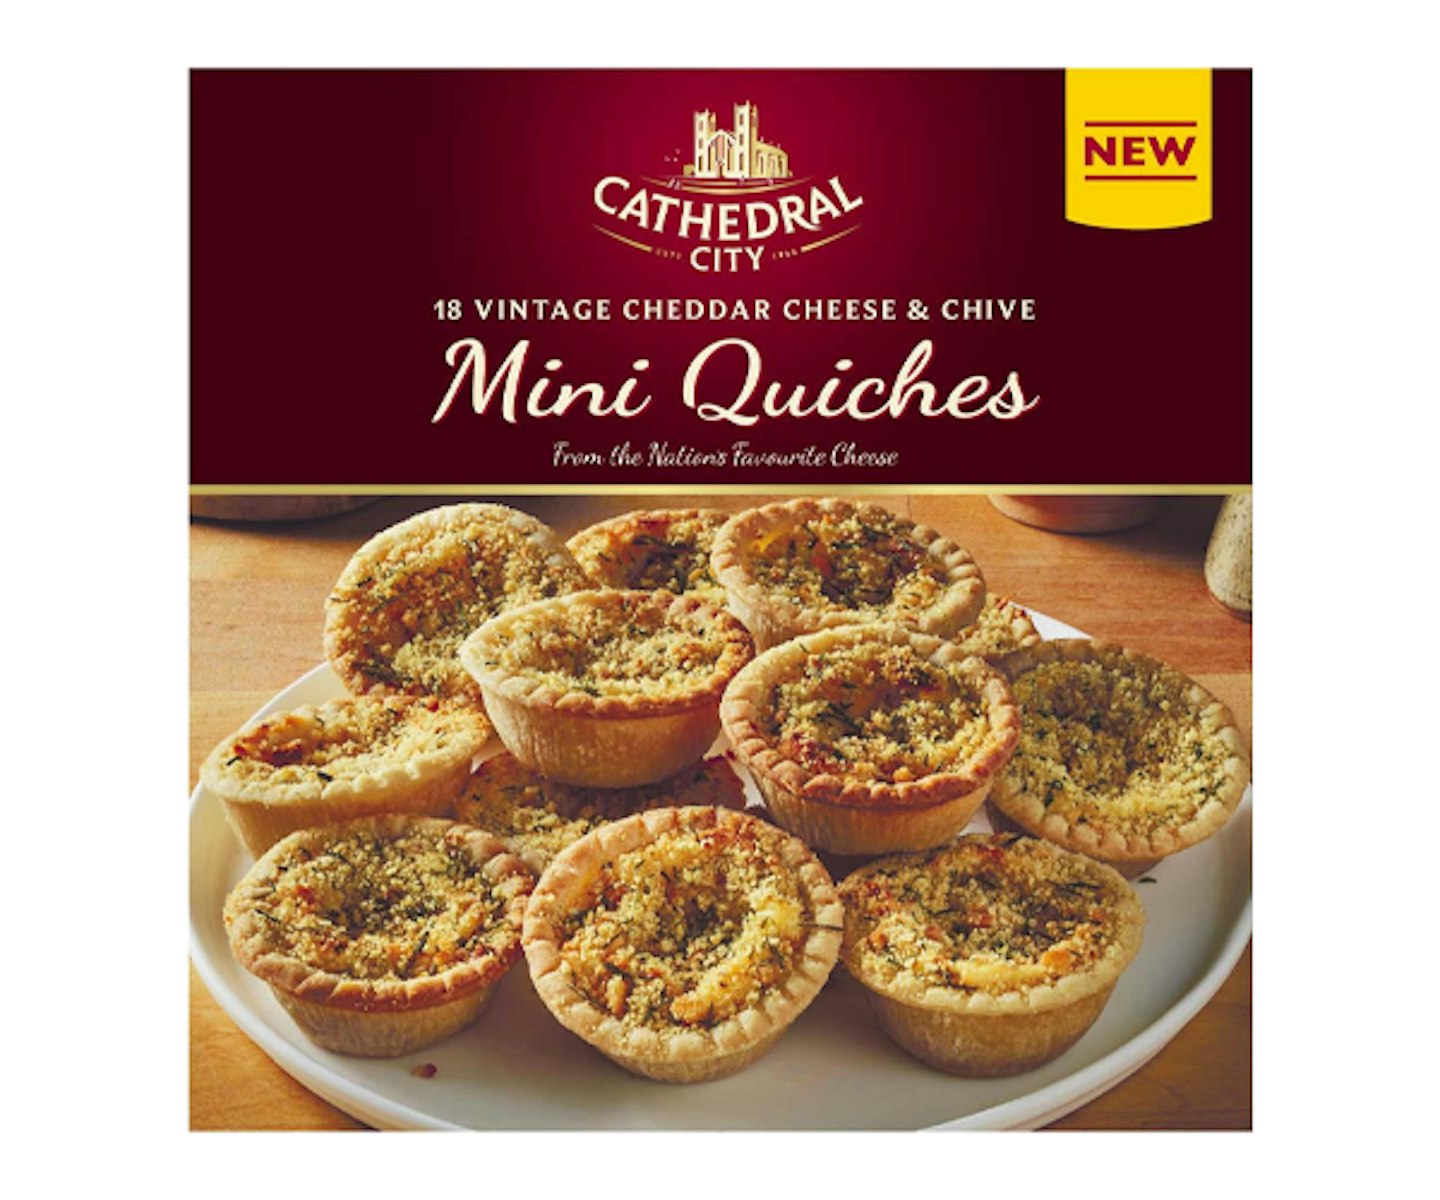 Cathedral City 18 Vintage Cheddar Cheese and Chive Mini Quiches 388g